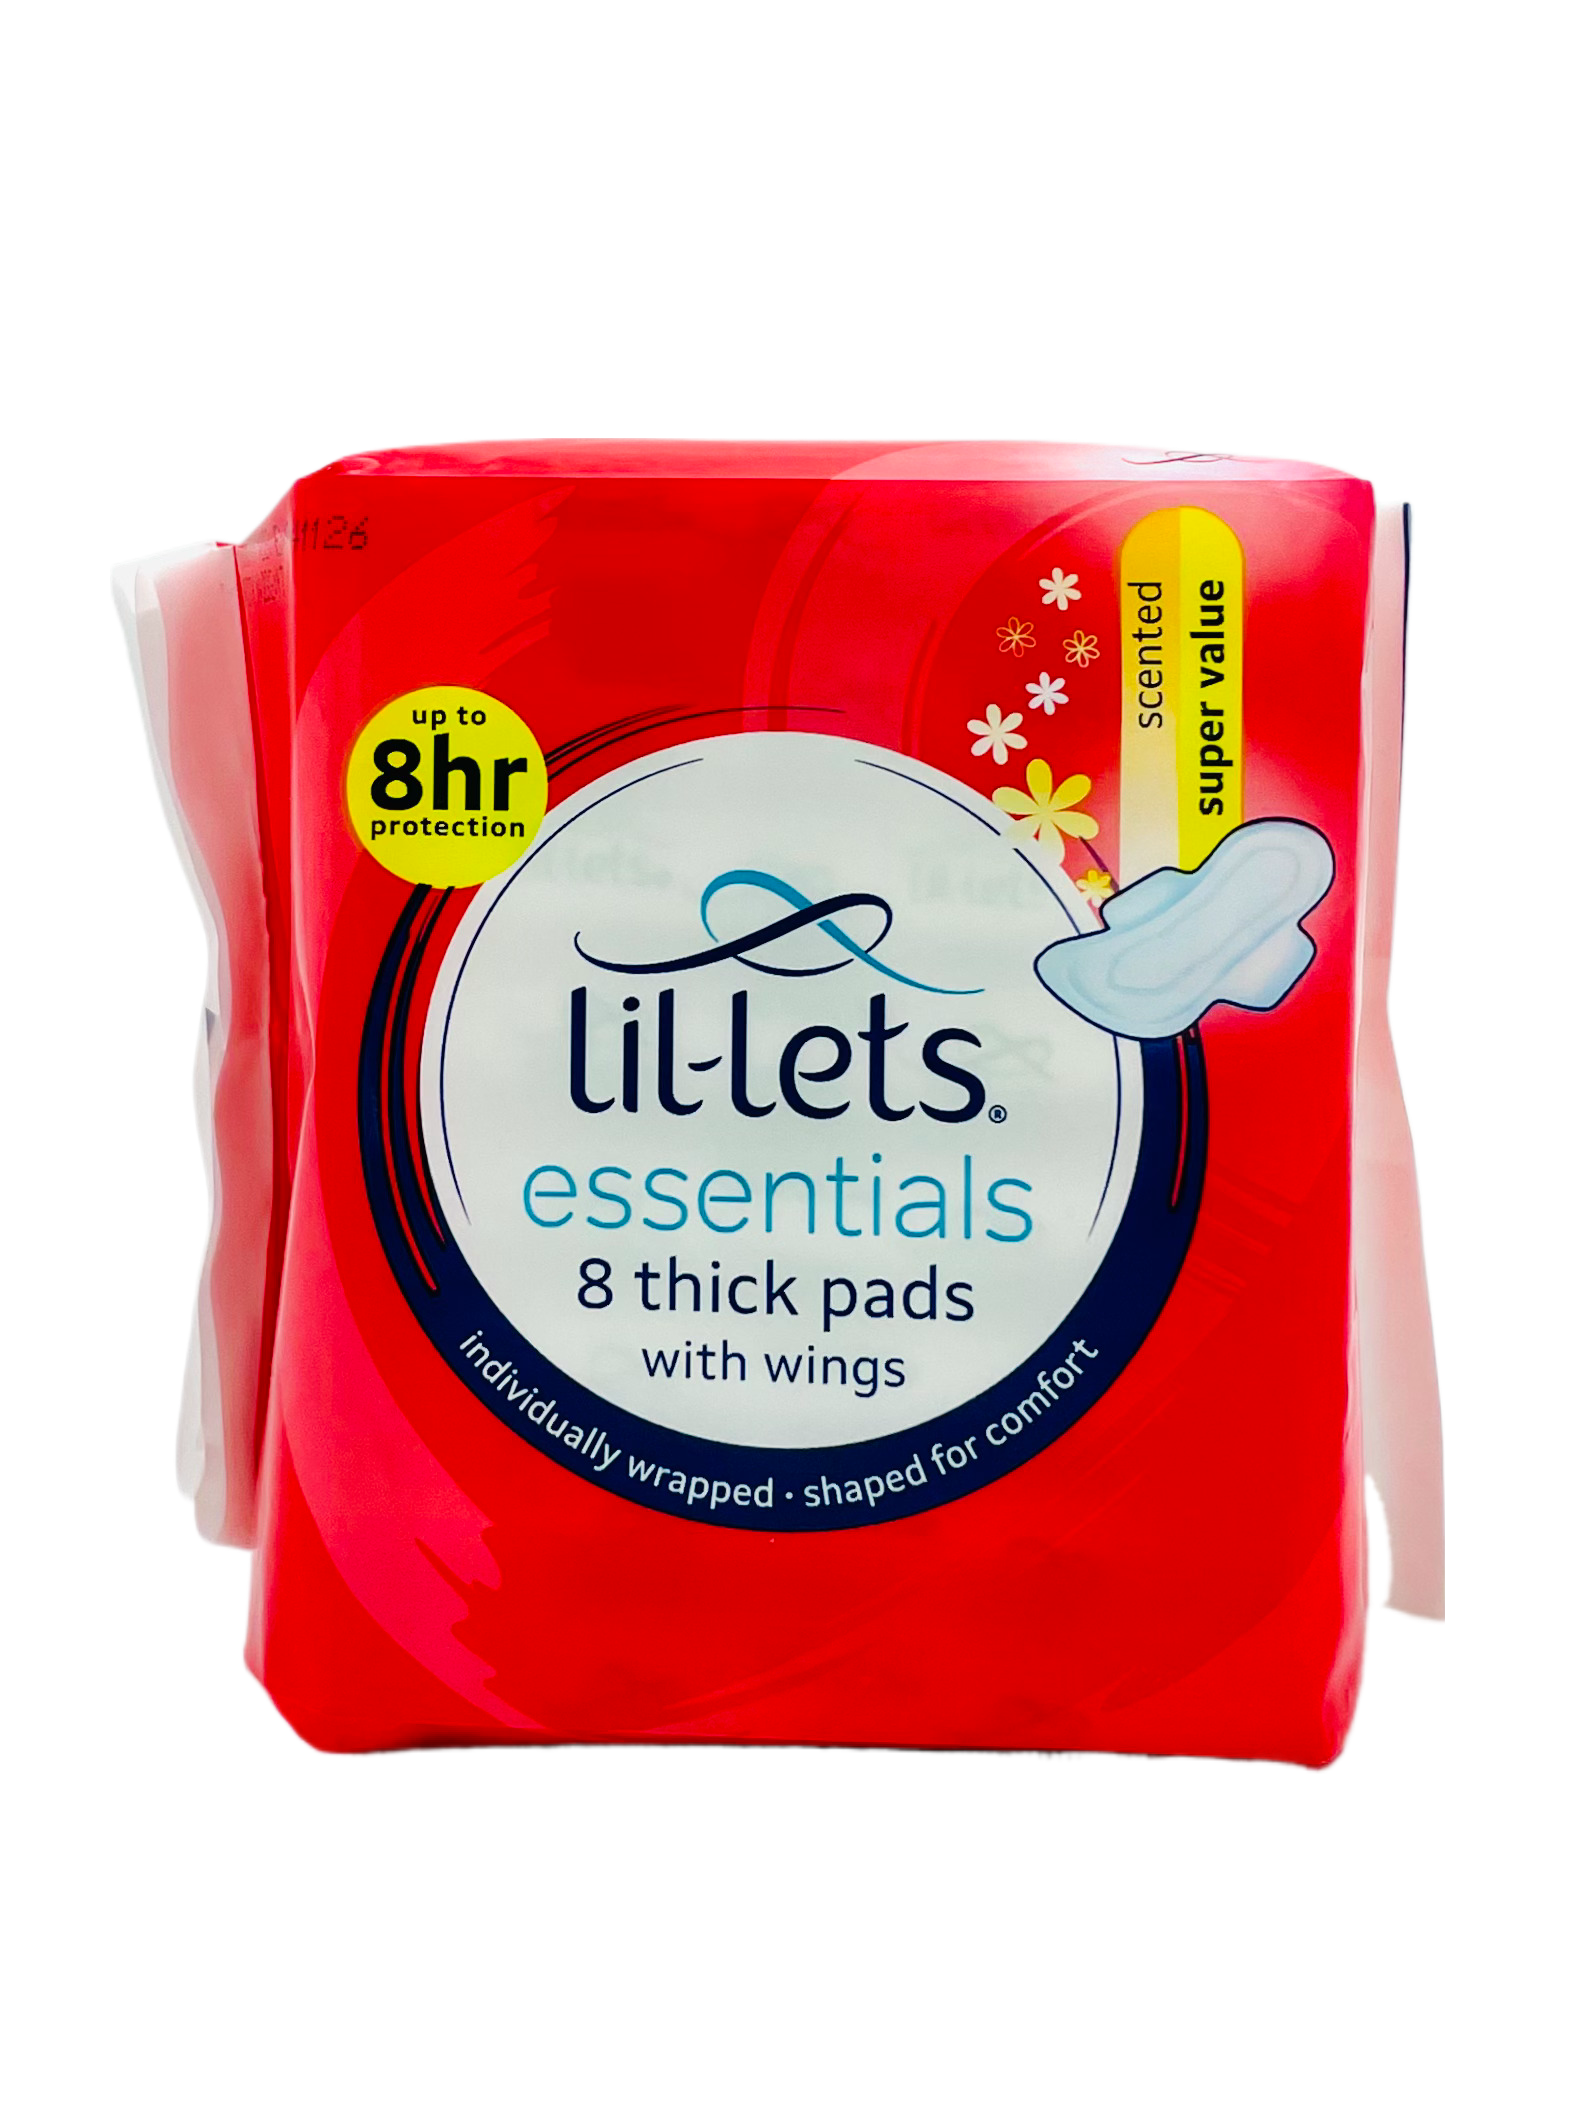 Lil-Lets Scented essential 8 thick pads